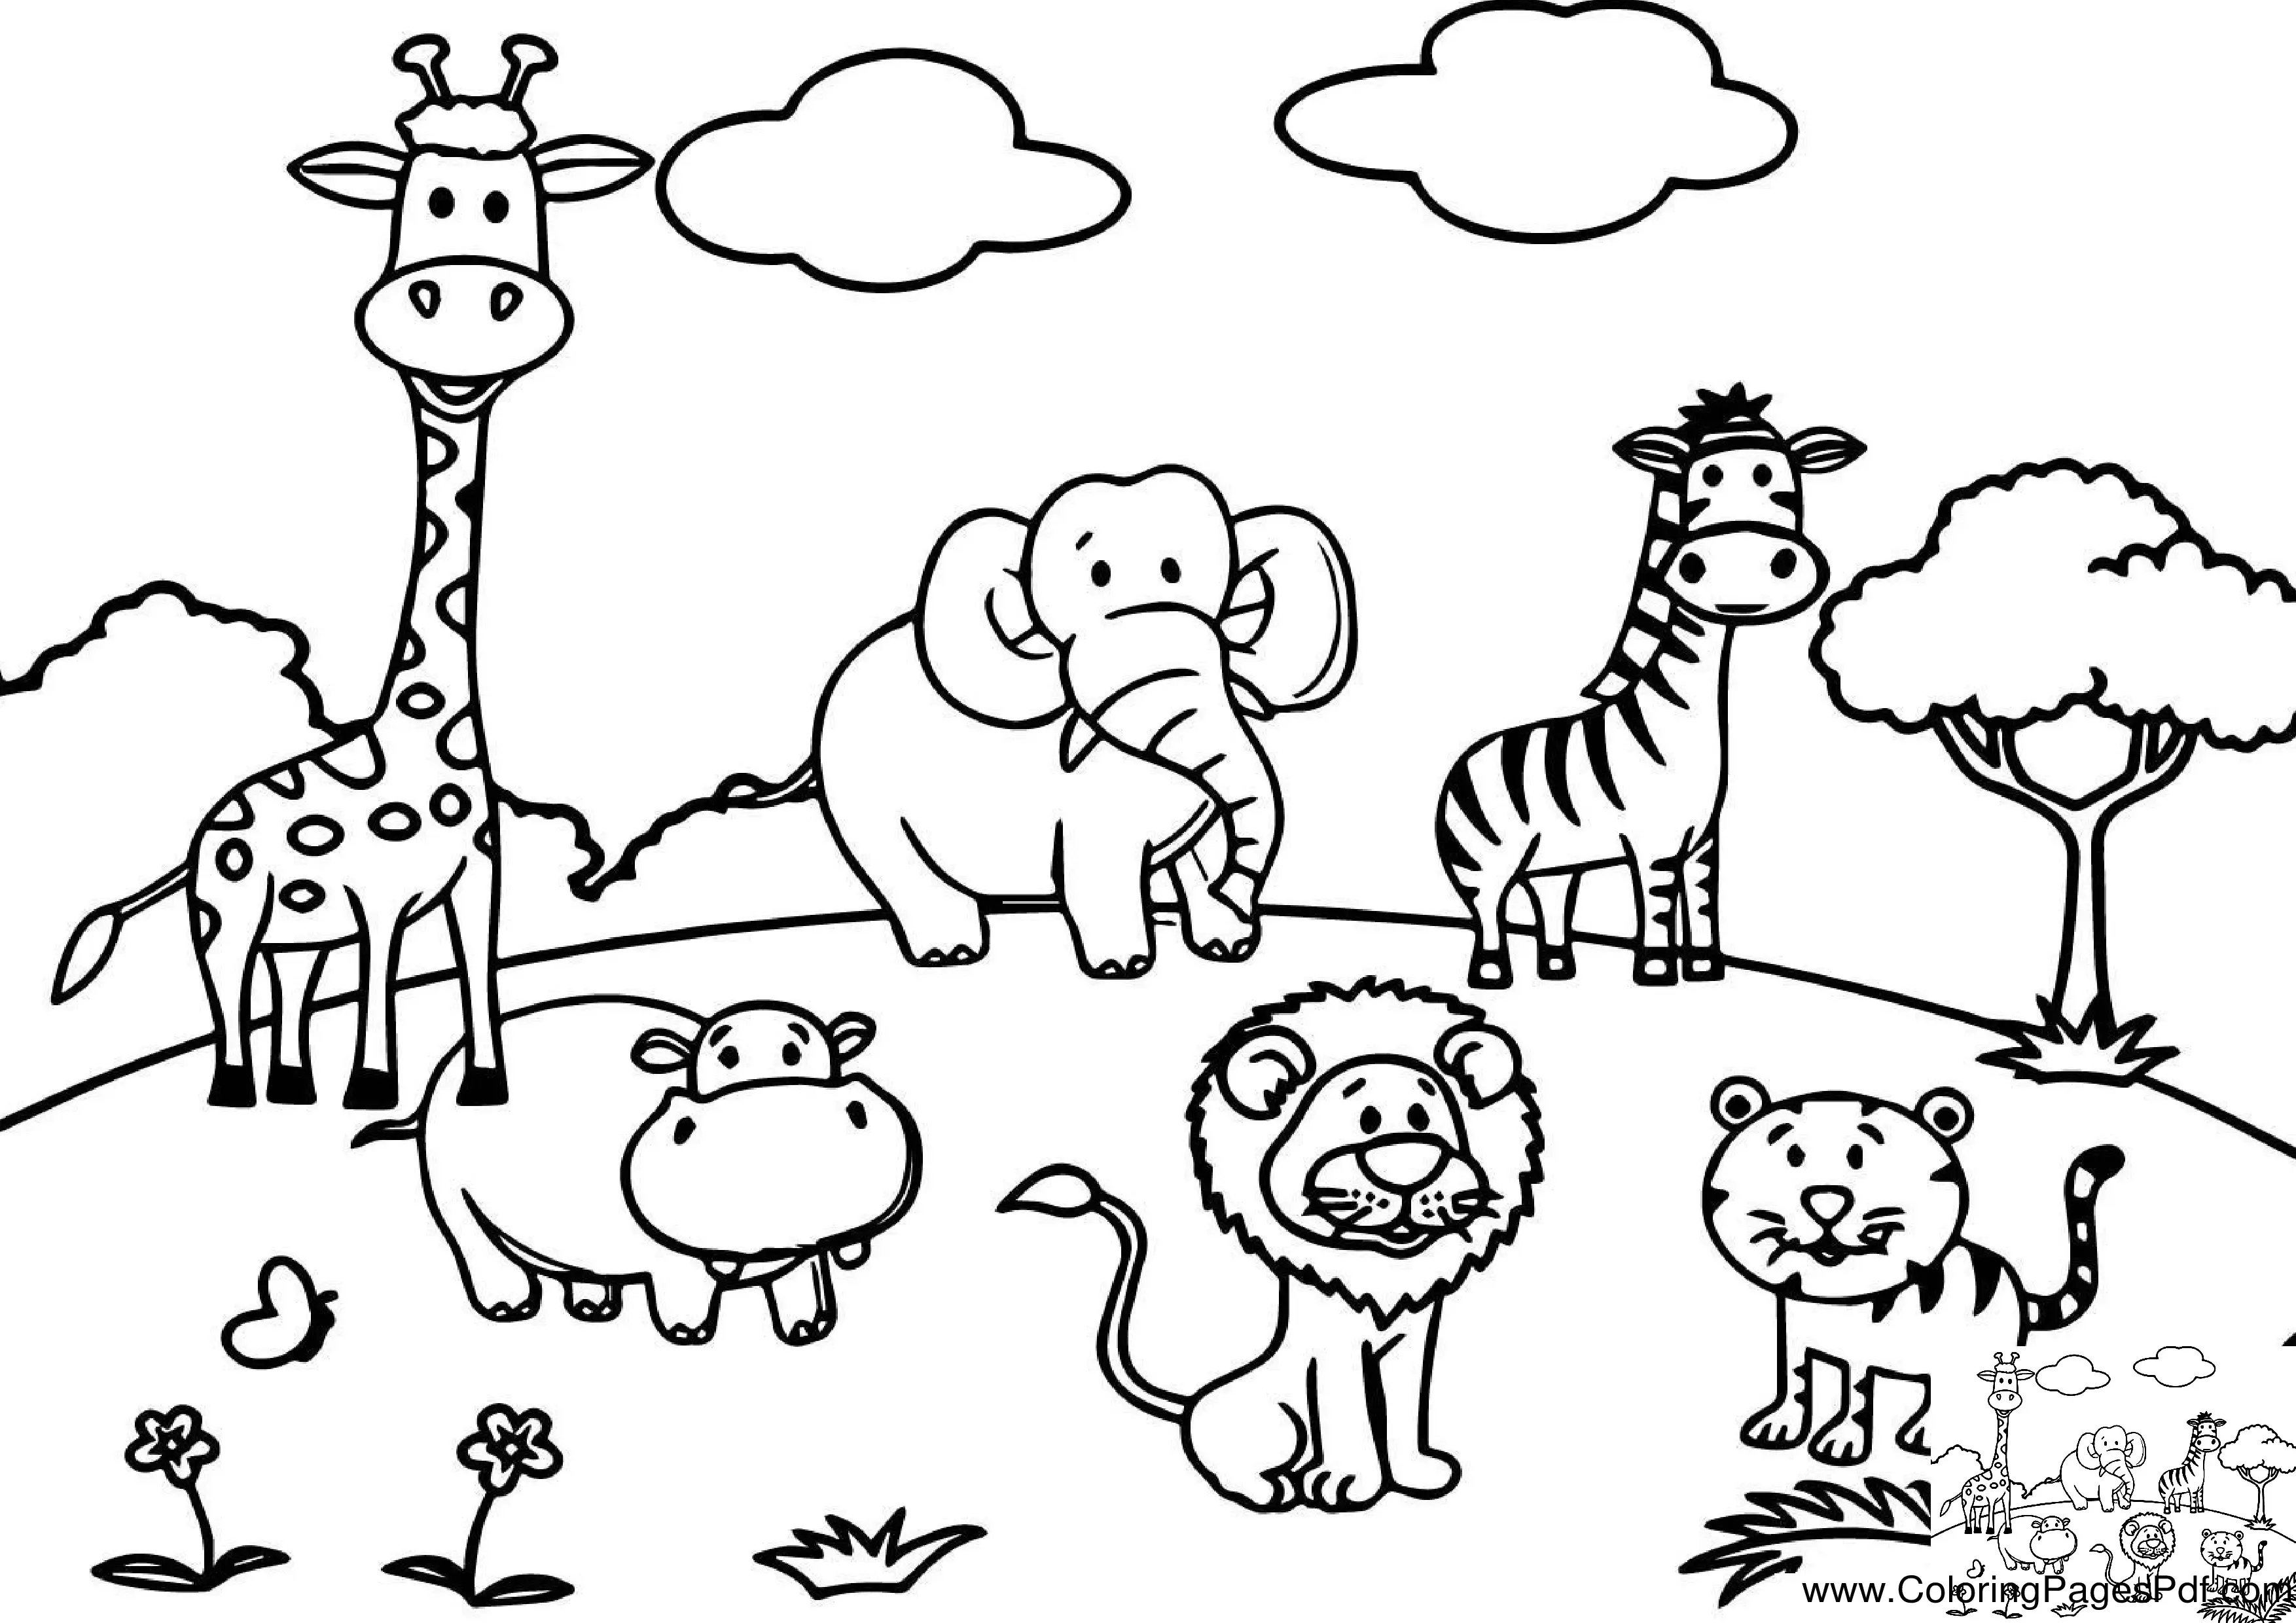 Coloring pages animals for kids